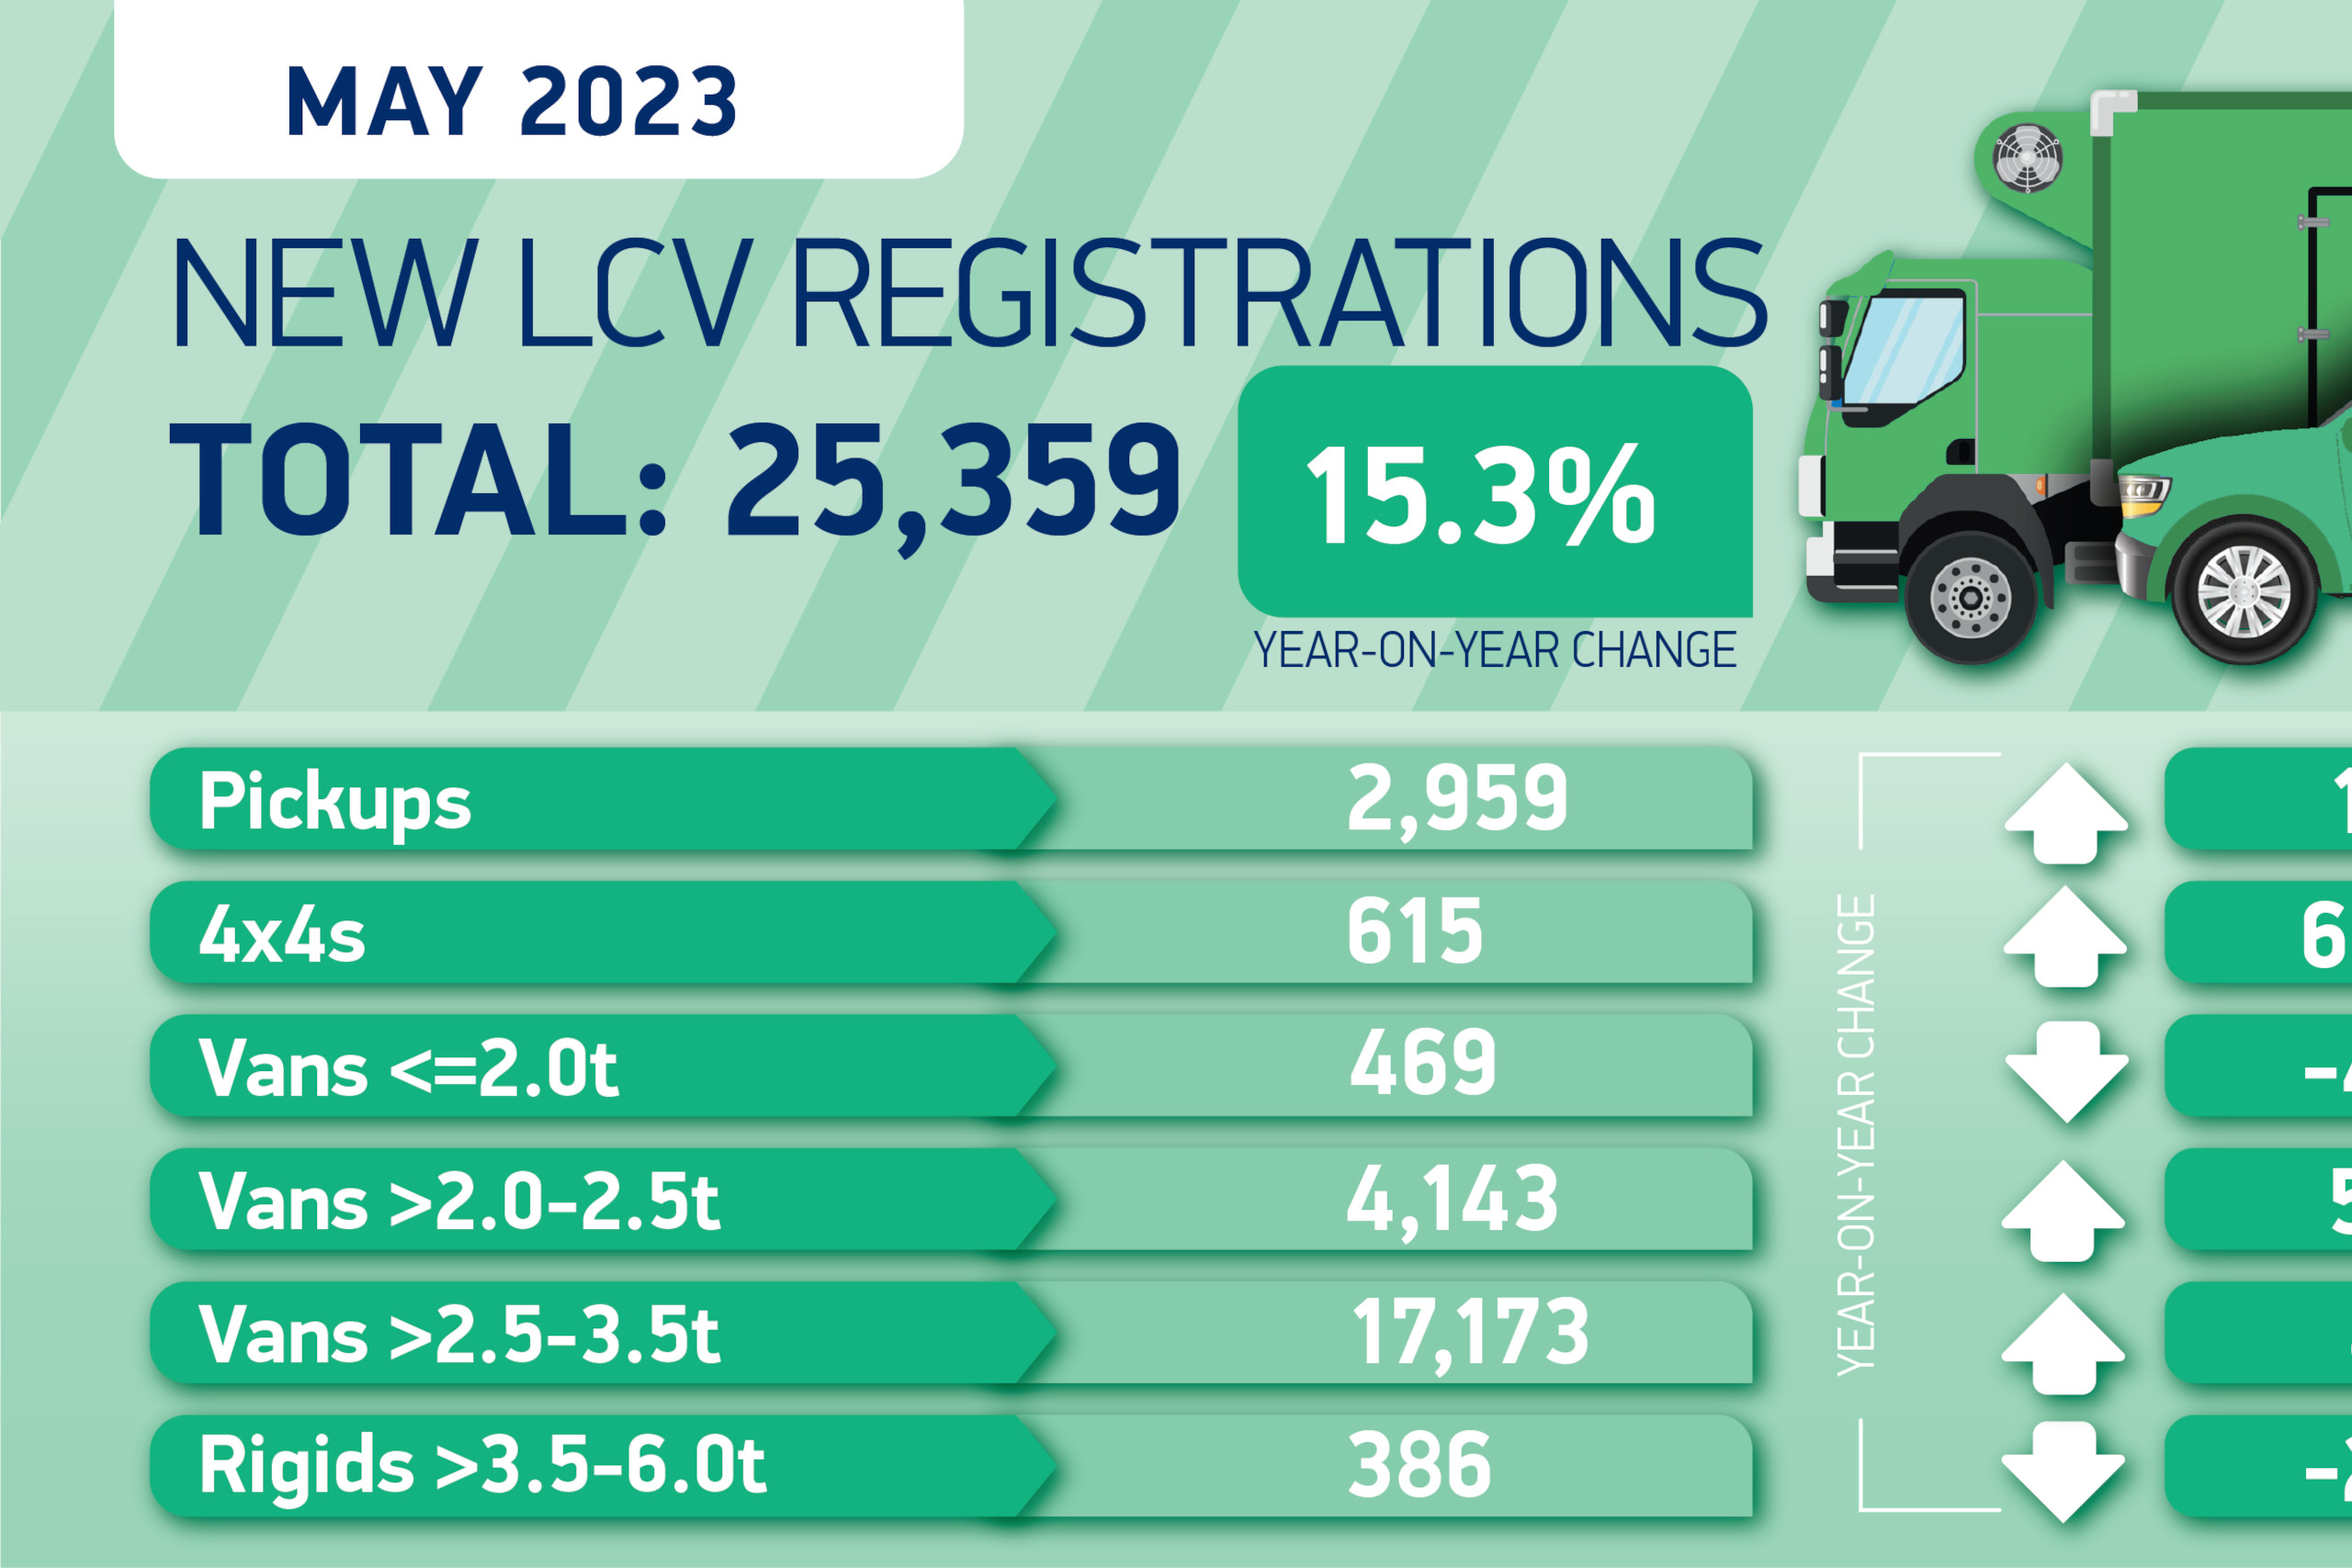 Growth Continues Through May for New Van Registrations